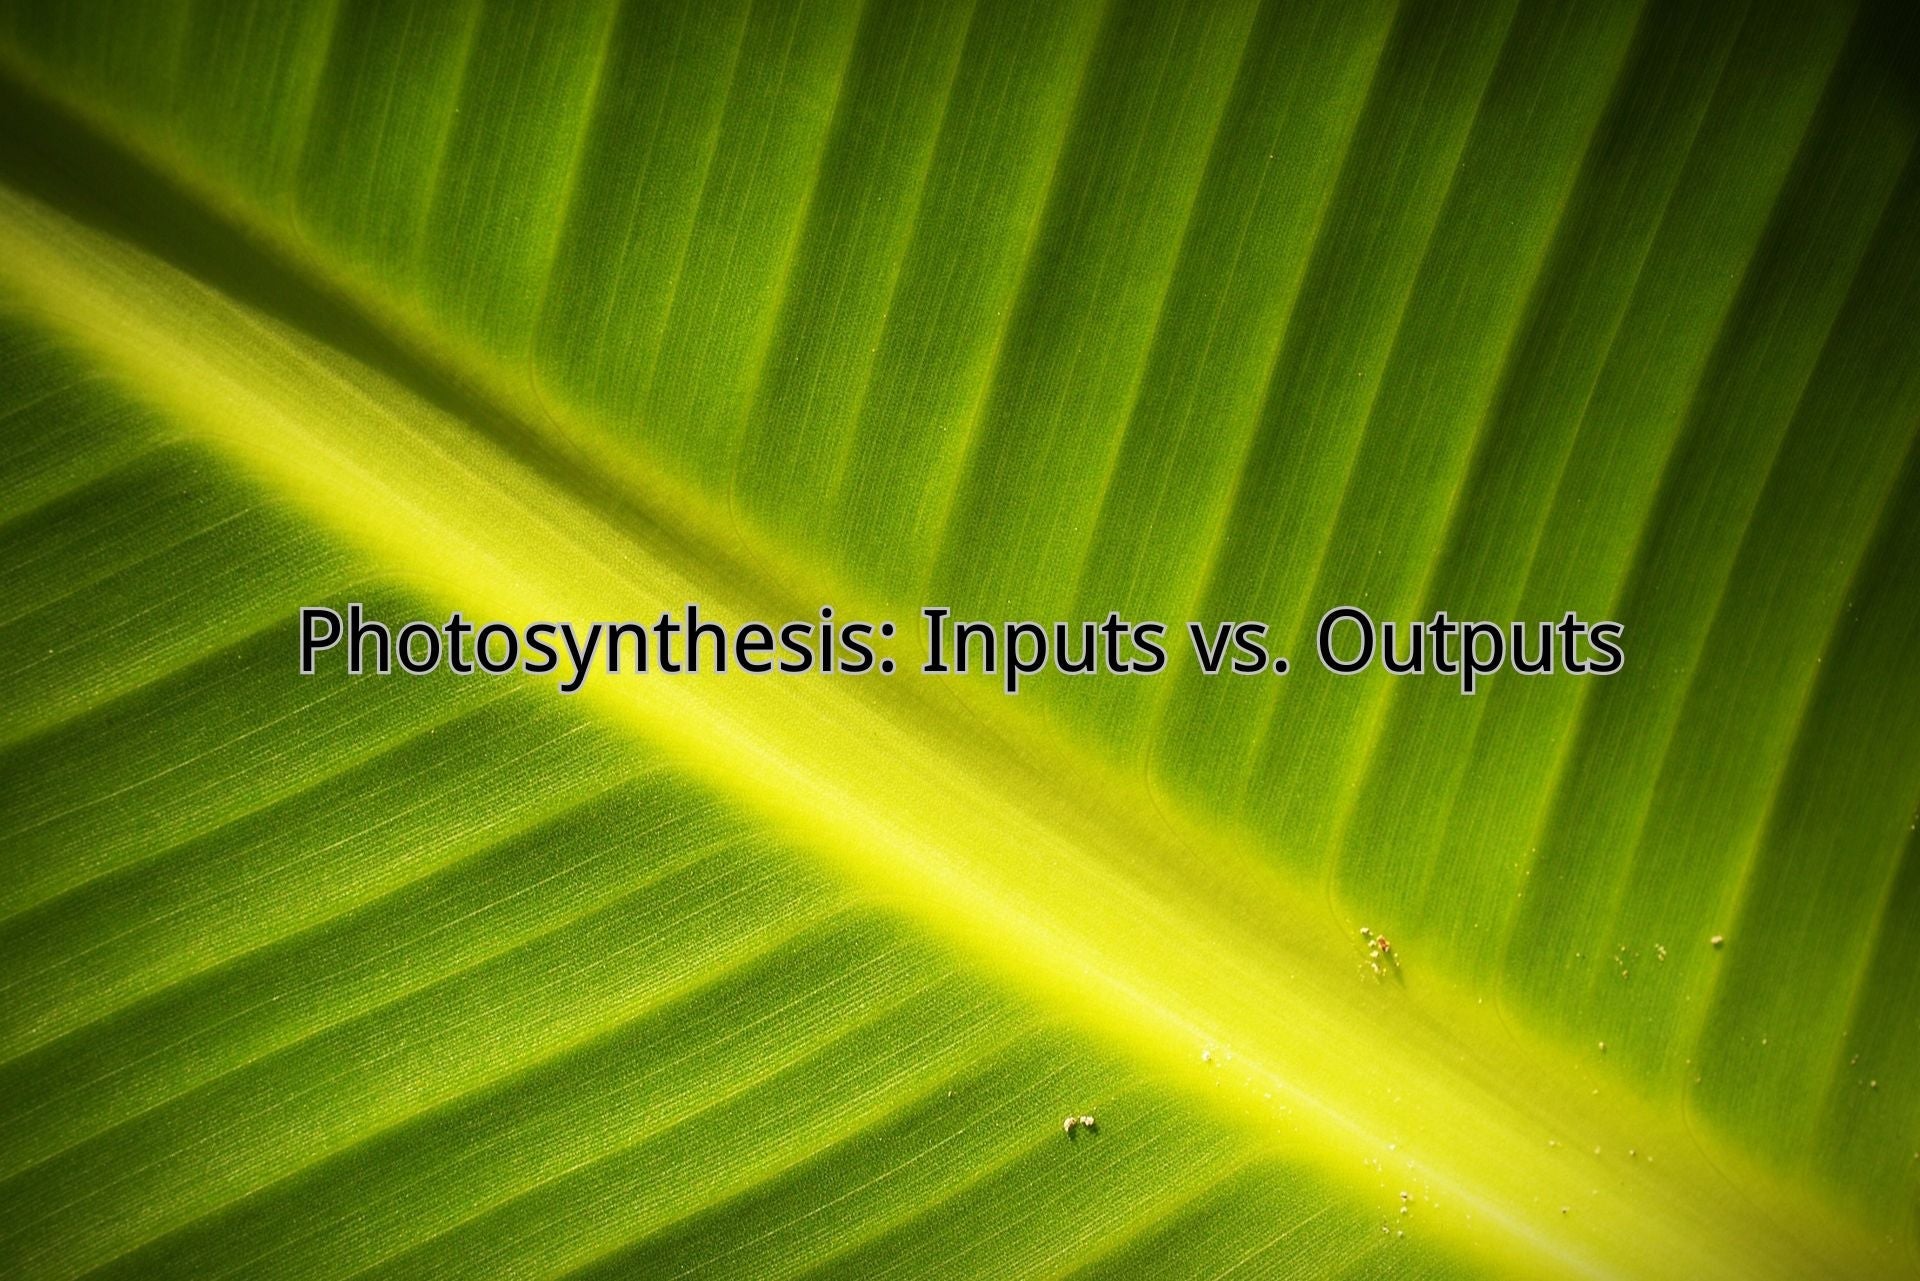 long text (essay) describe the inputs and outputs of photosynthesis